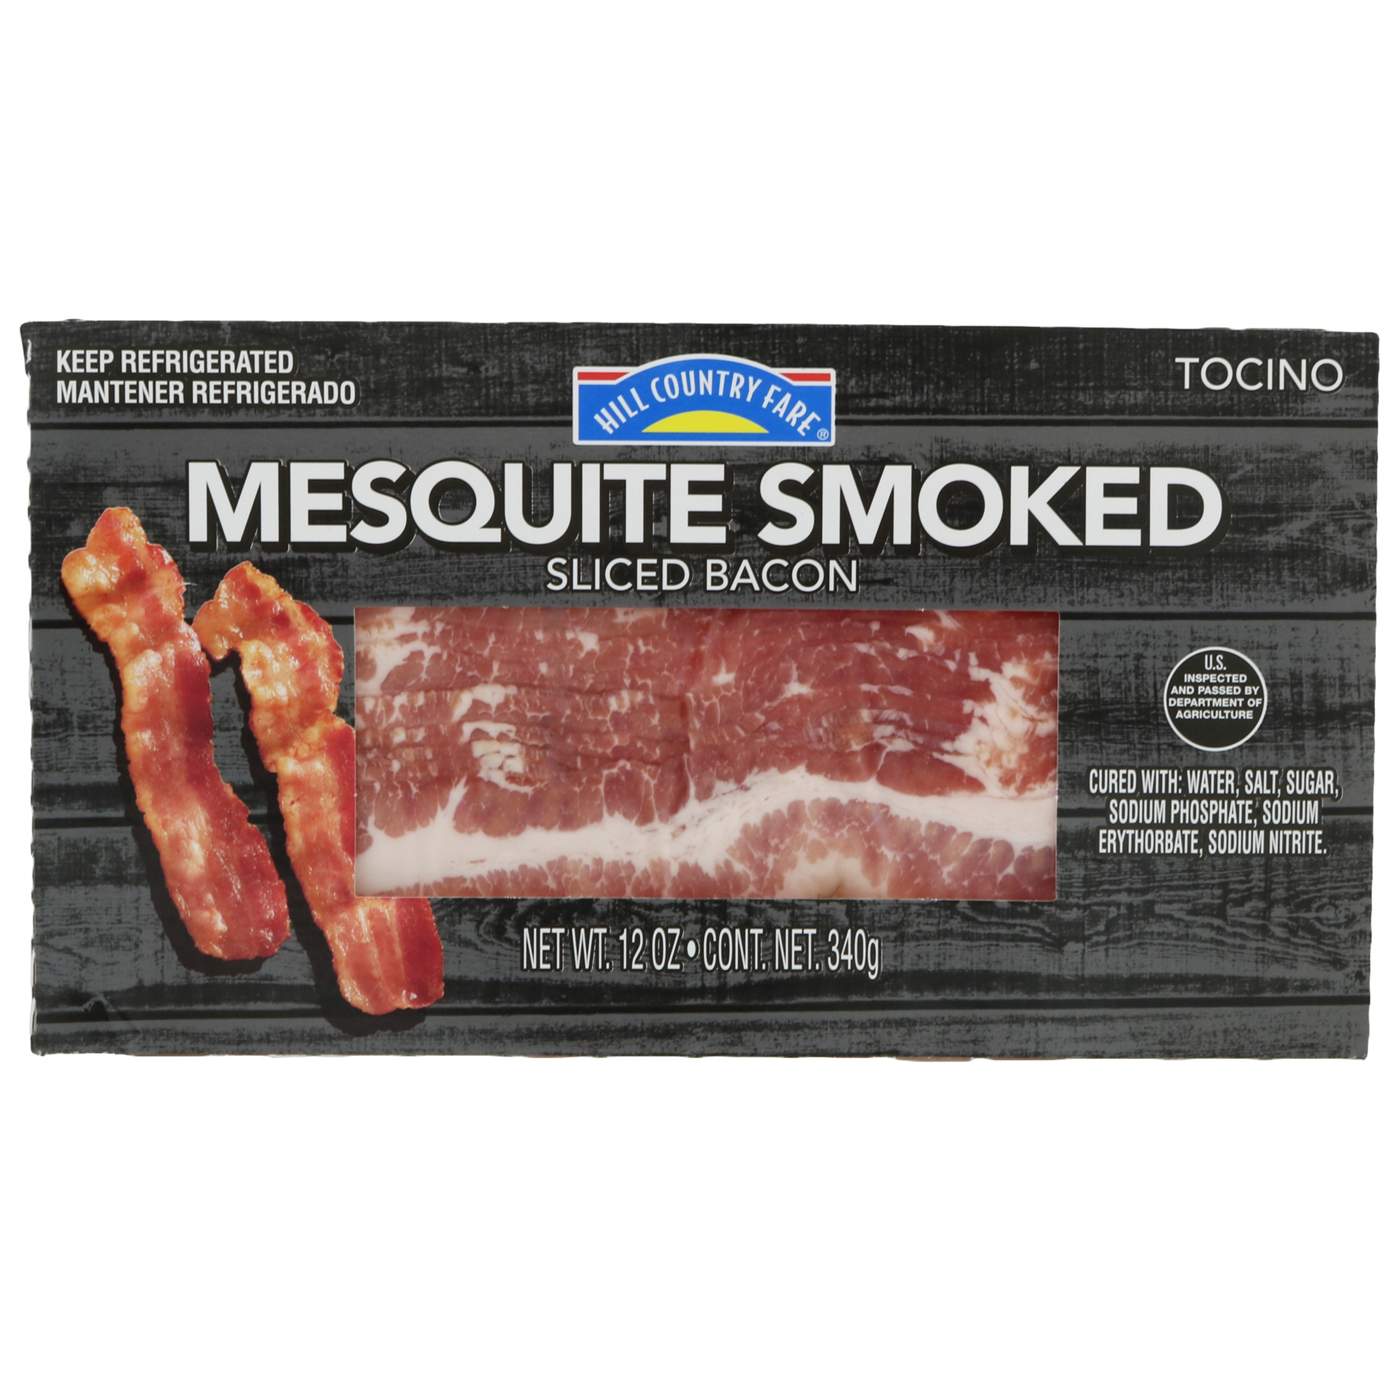 Hill Country Fare Mesquite Smoked Sliced Bacon; image 1 of 2